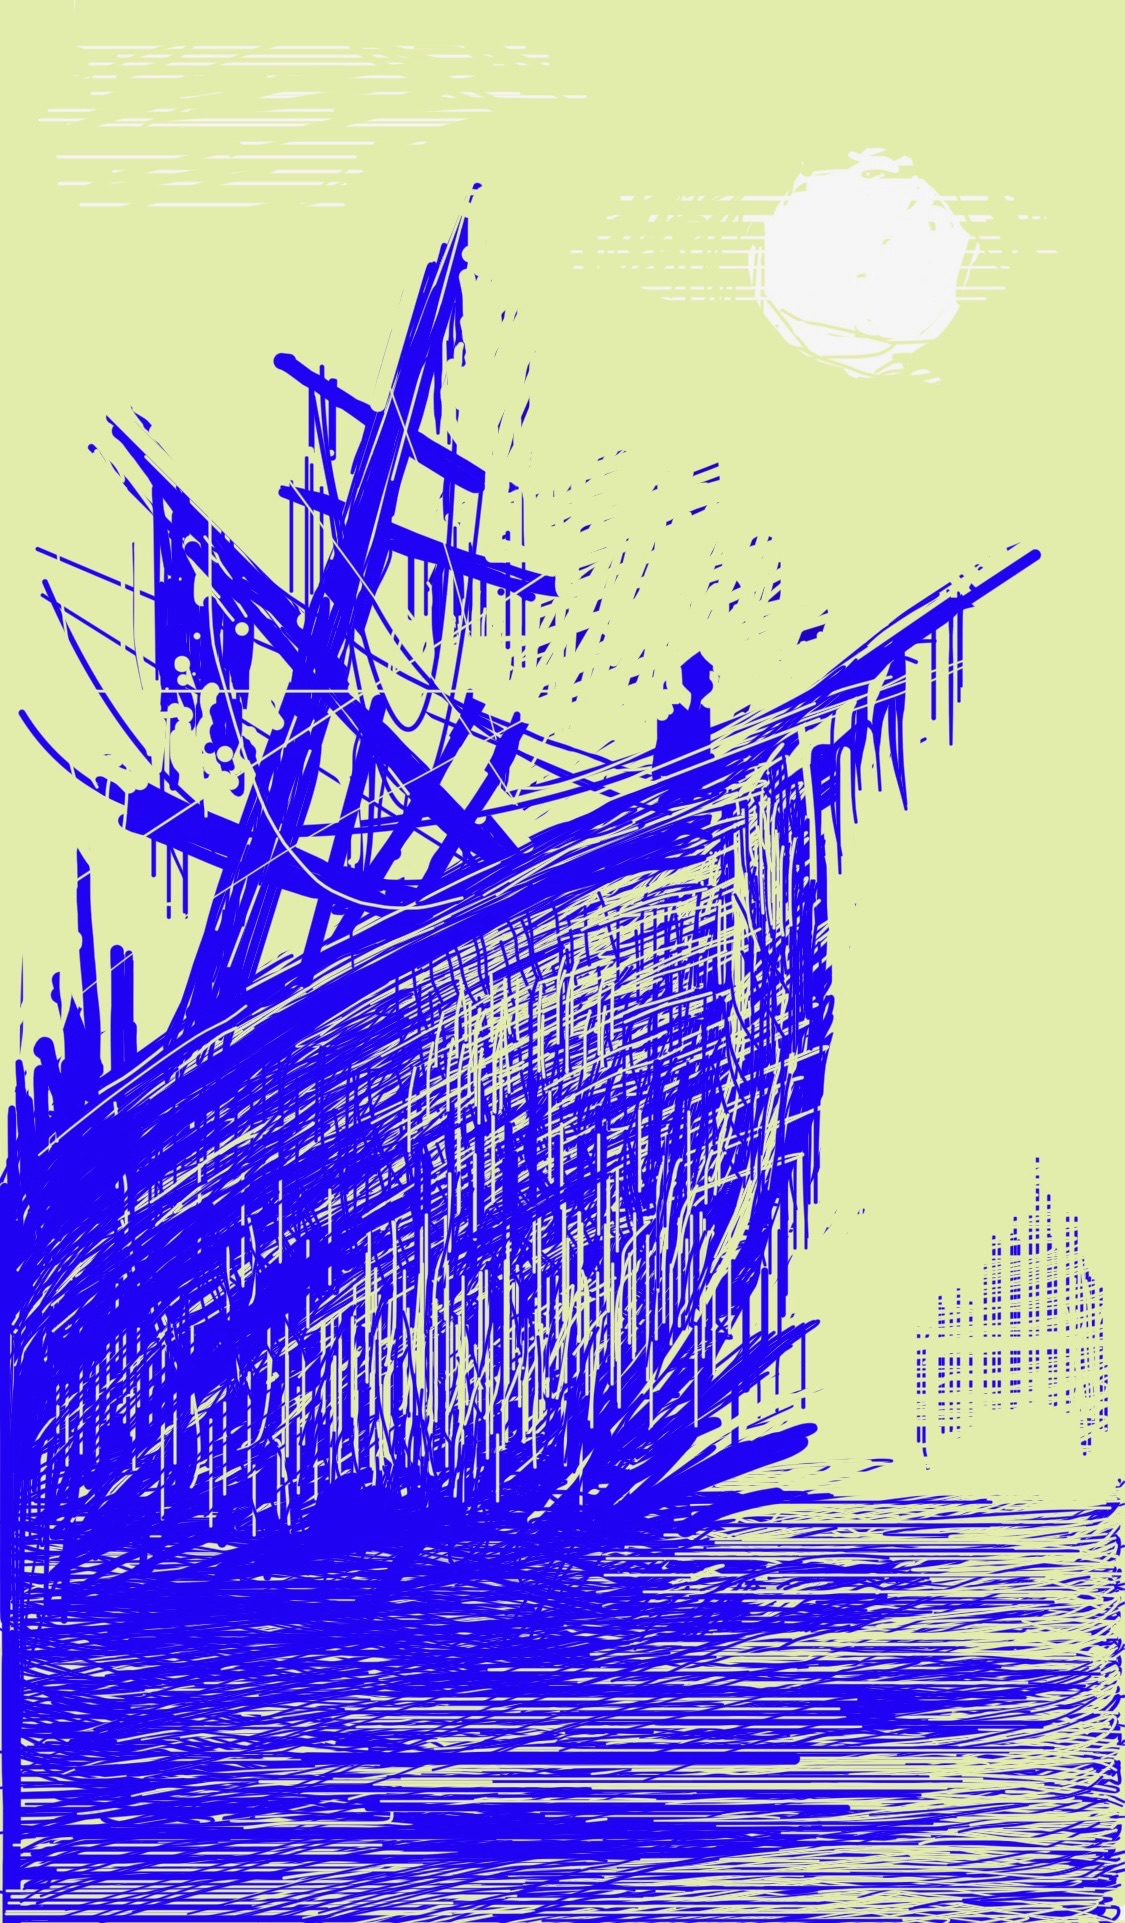 A shipwreck with a single person standing in the bow